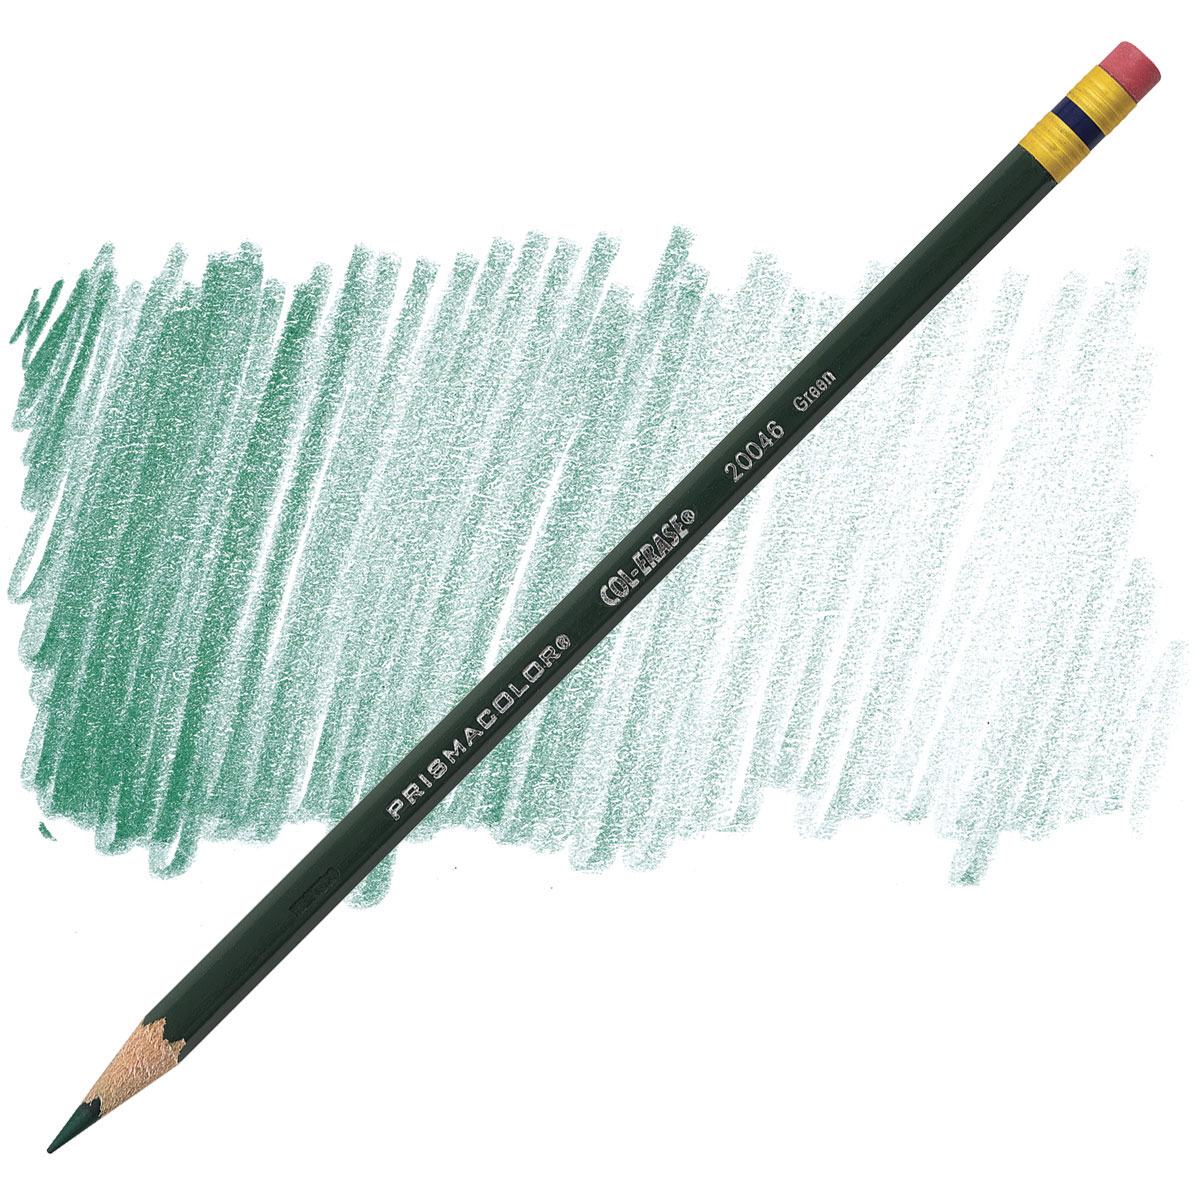 Col-Erase® Erasable Color Pencil, available in 24 colors and Sets! 